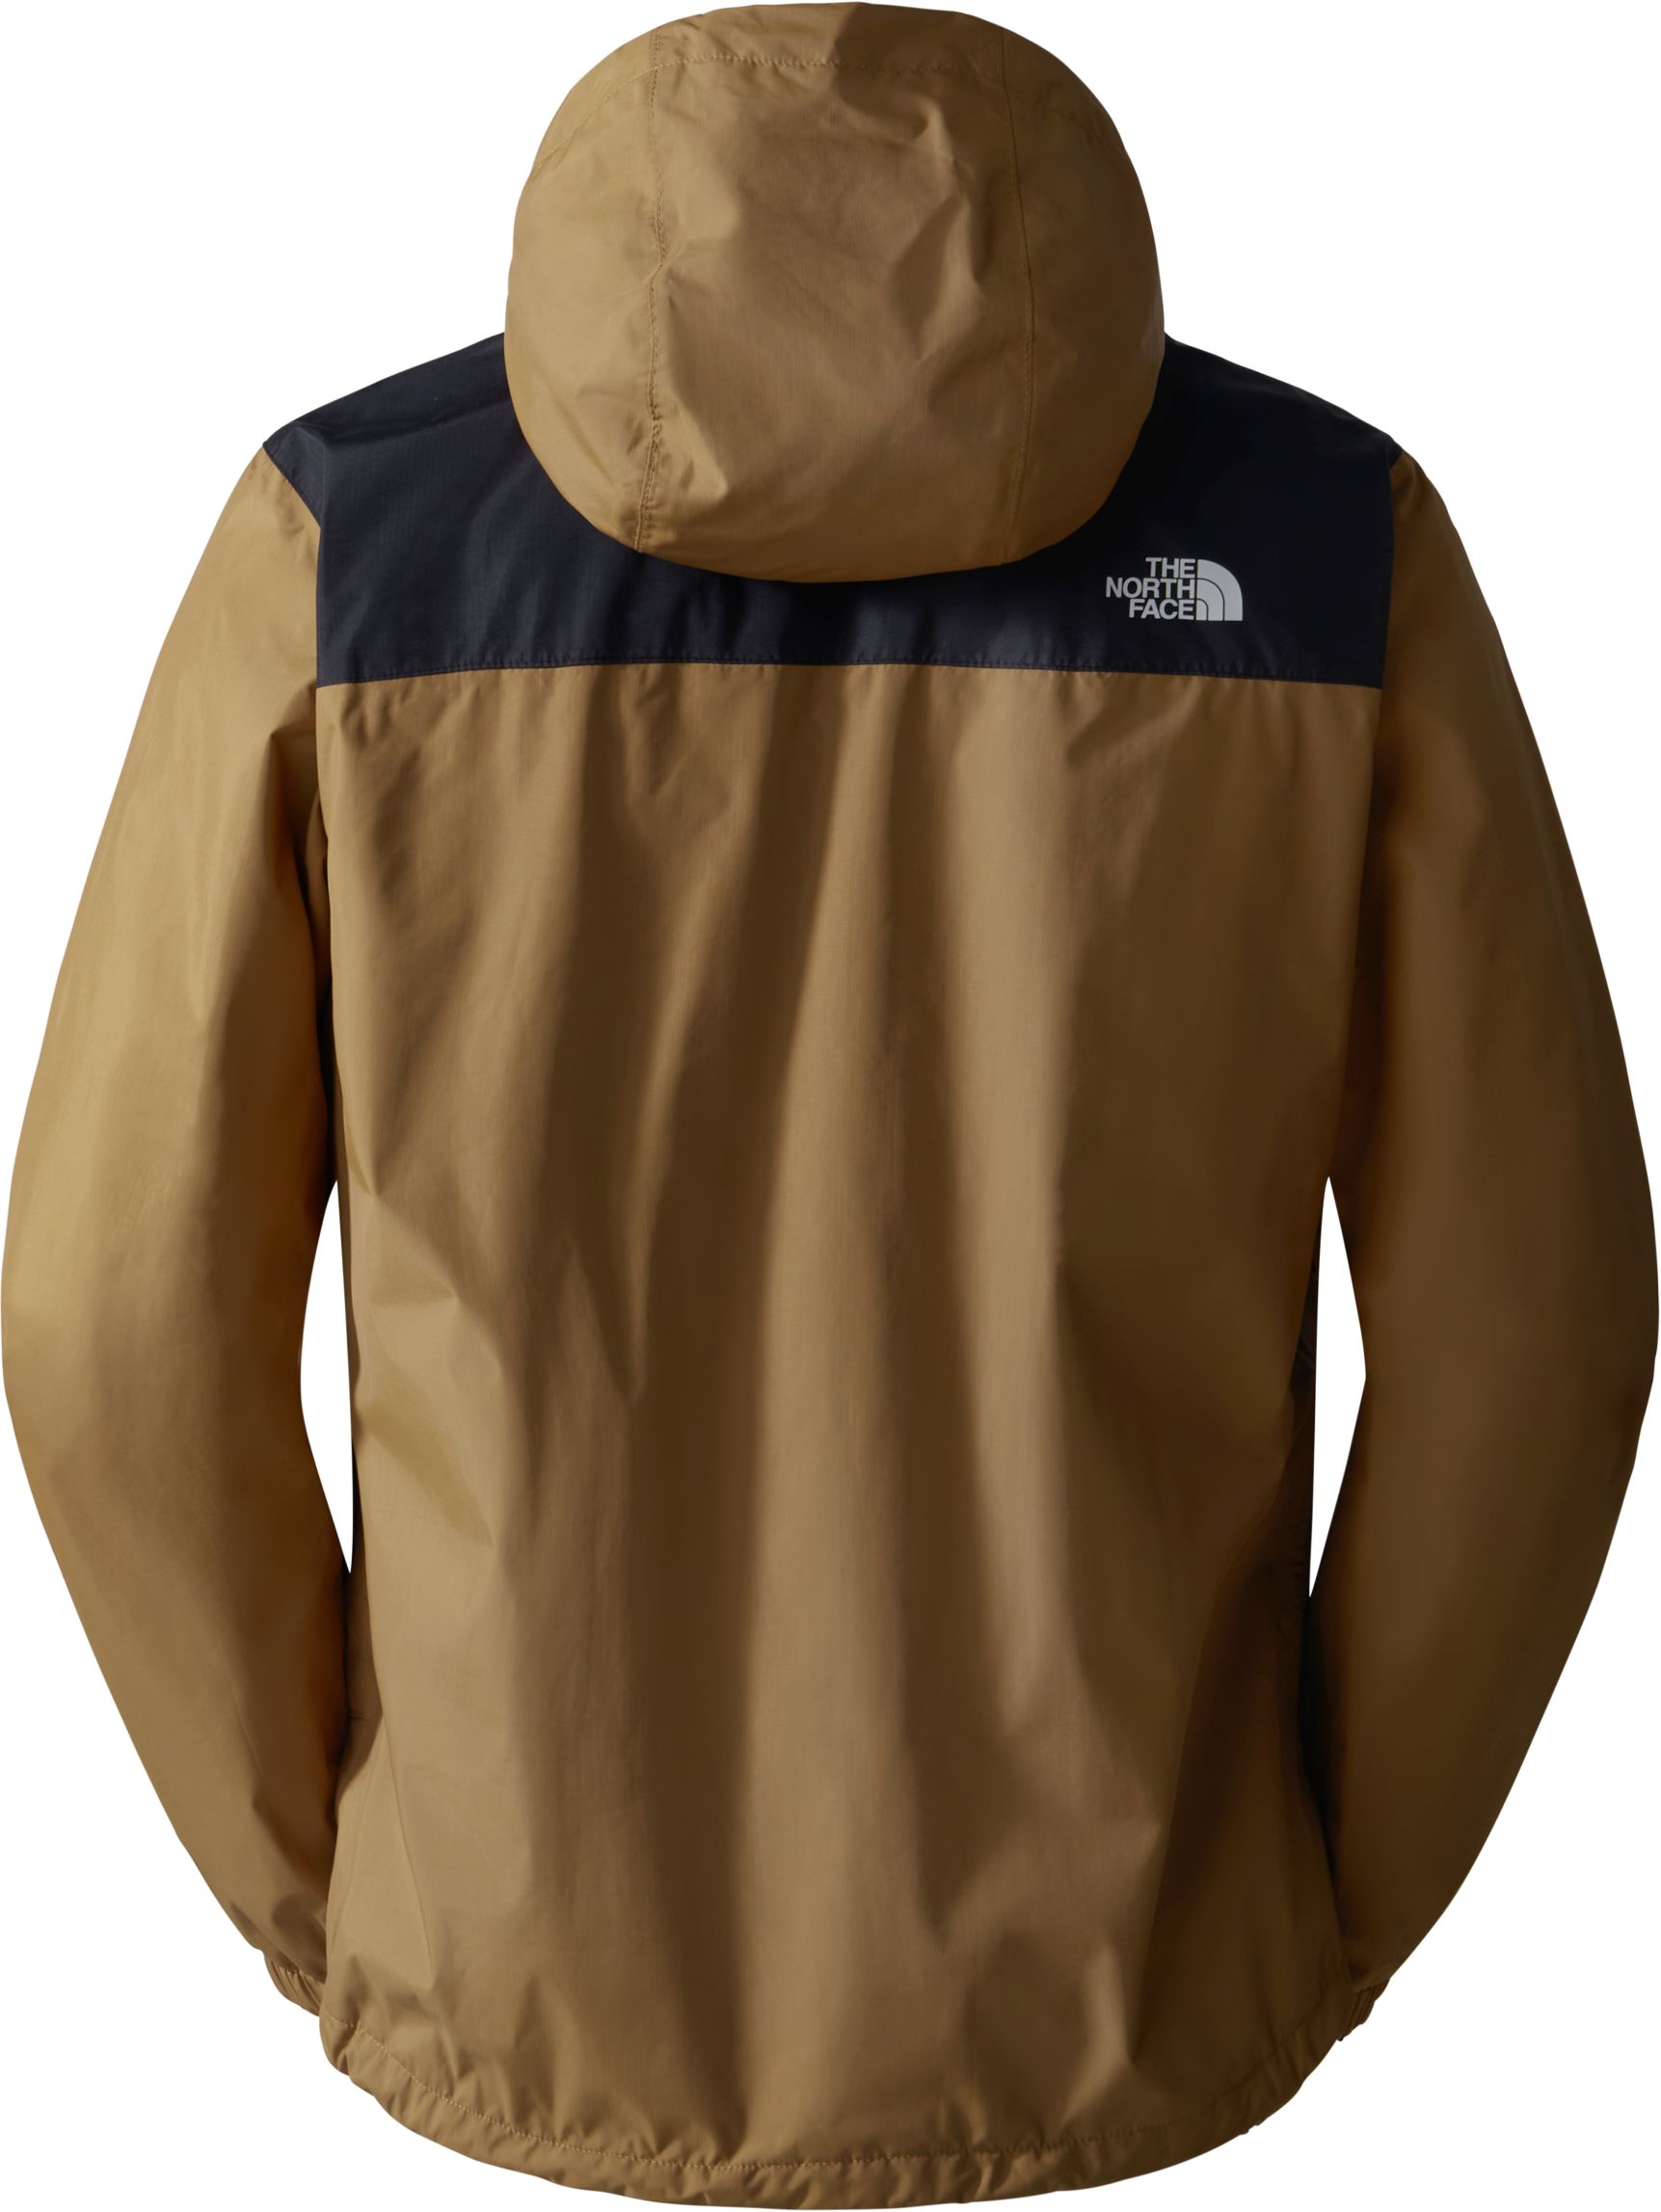 THE NORTH FACE, M ANTORA JACKET